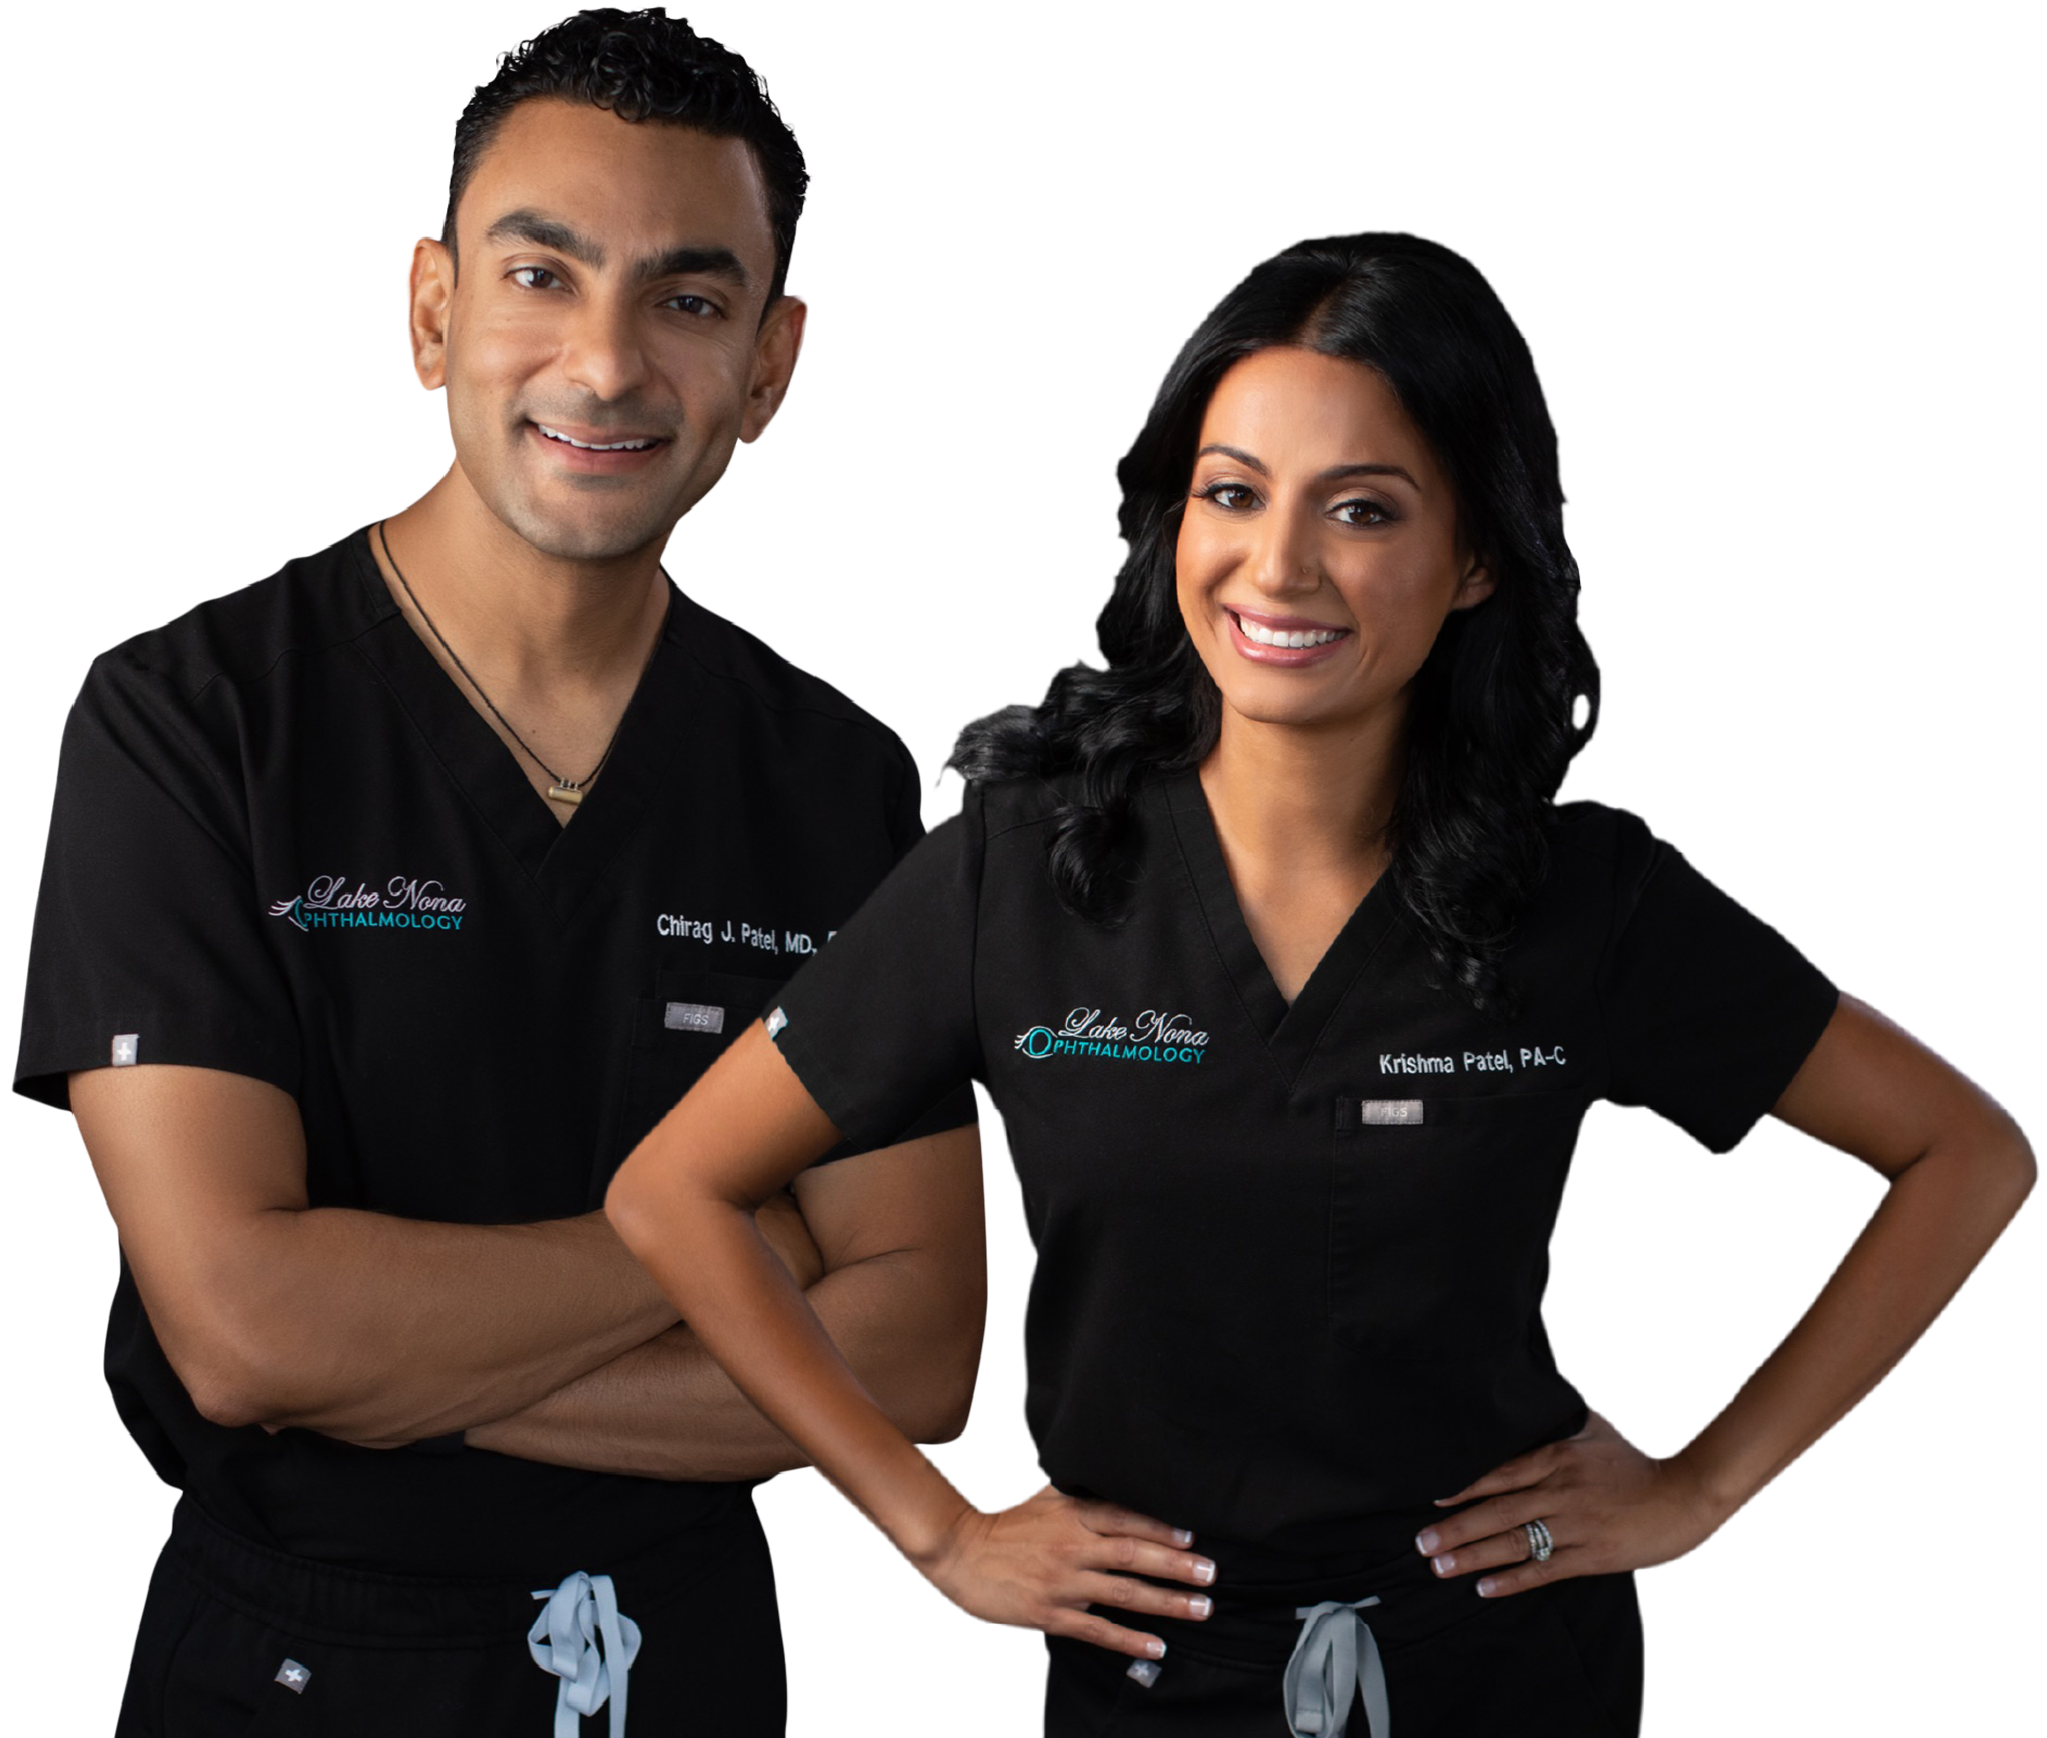 Chirag J. Patel, MD, FACS, Lake Nona Ophthalmology Founder, and Krishma Patel, PA-C Physician Assistant.